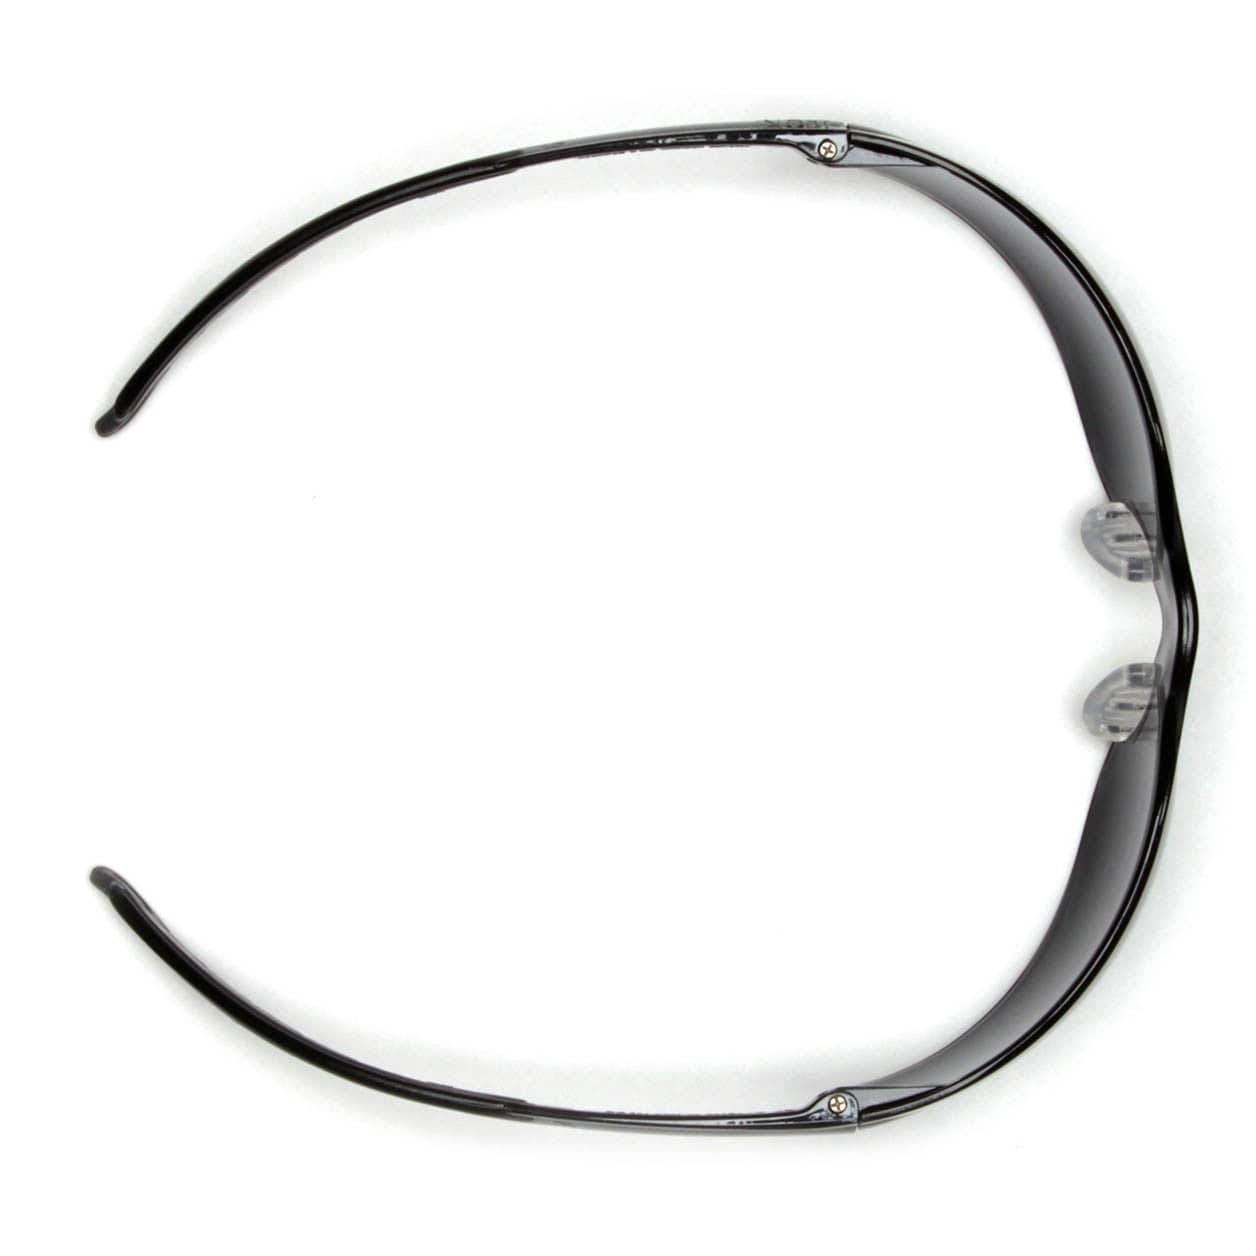 Pyramex Itek Safety Glasses with Silver Mirror Lens S5870S Top View